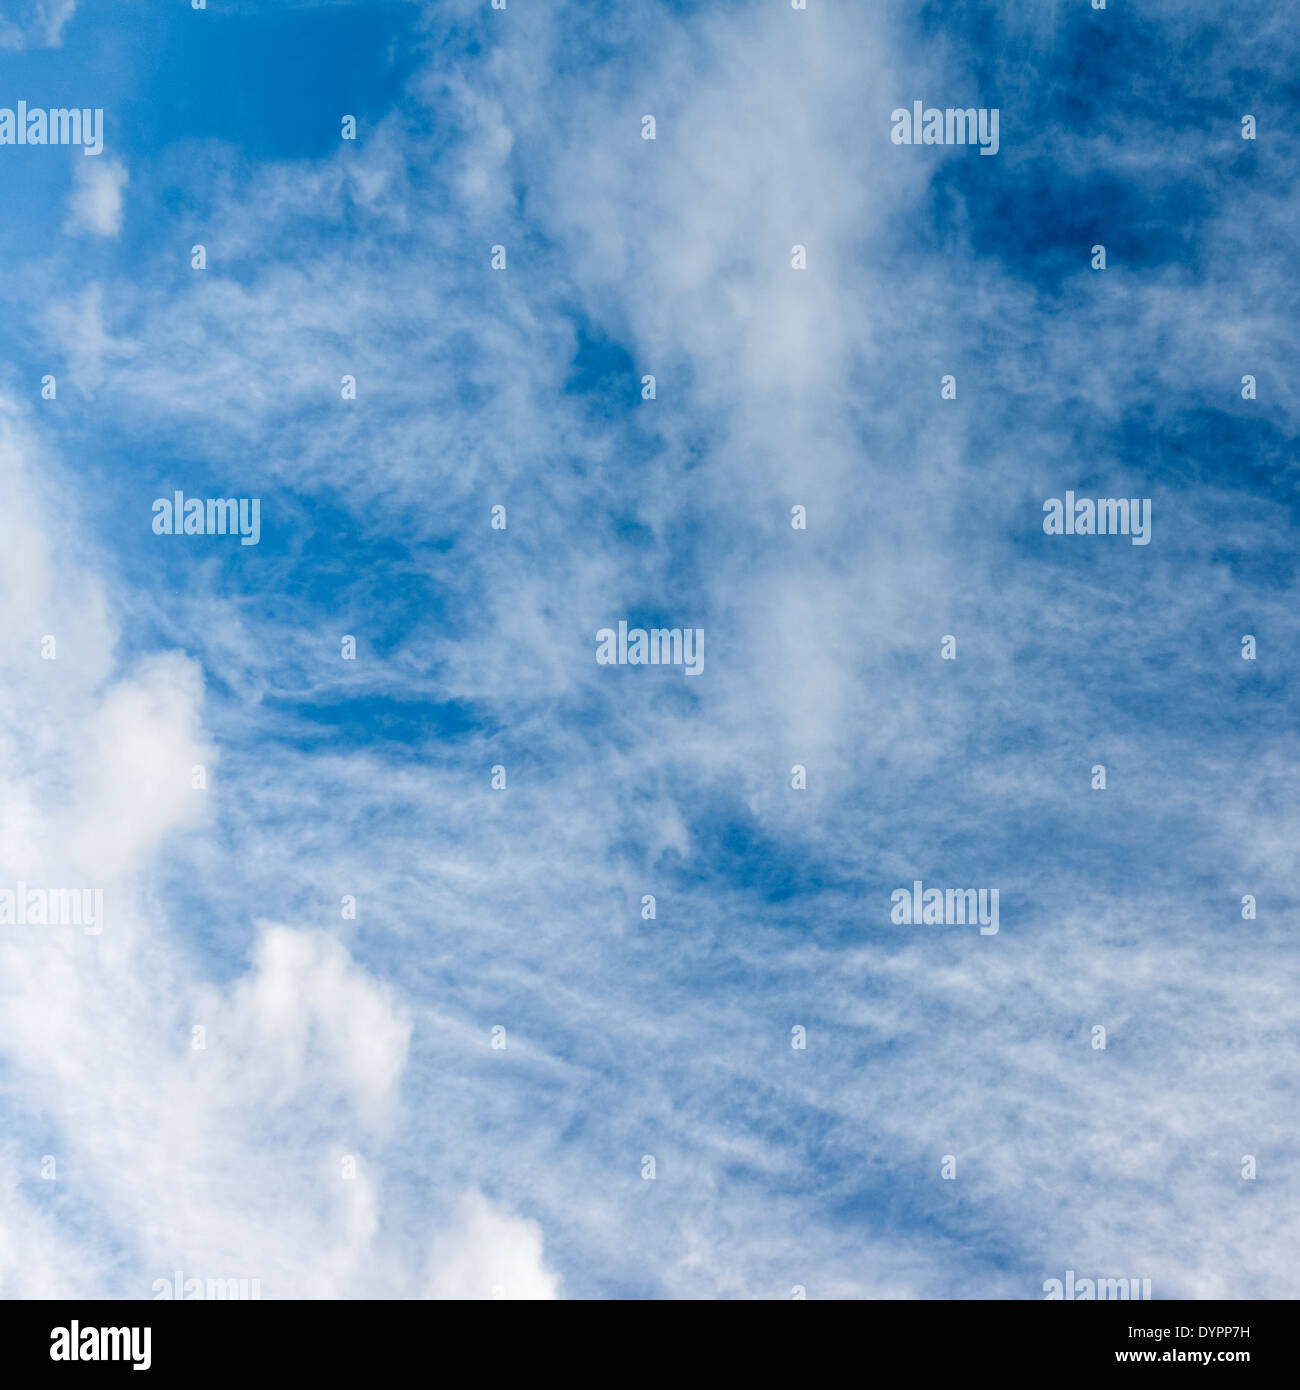 Semi-abstract patterns of wispy white cloud against a blue sky; square format. Stock Photo